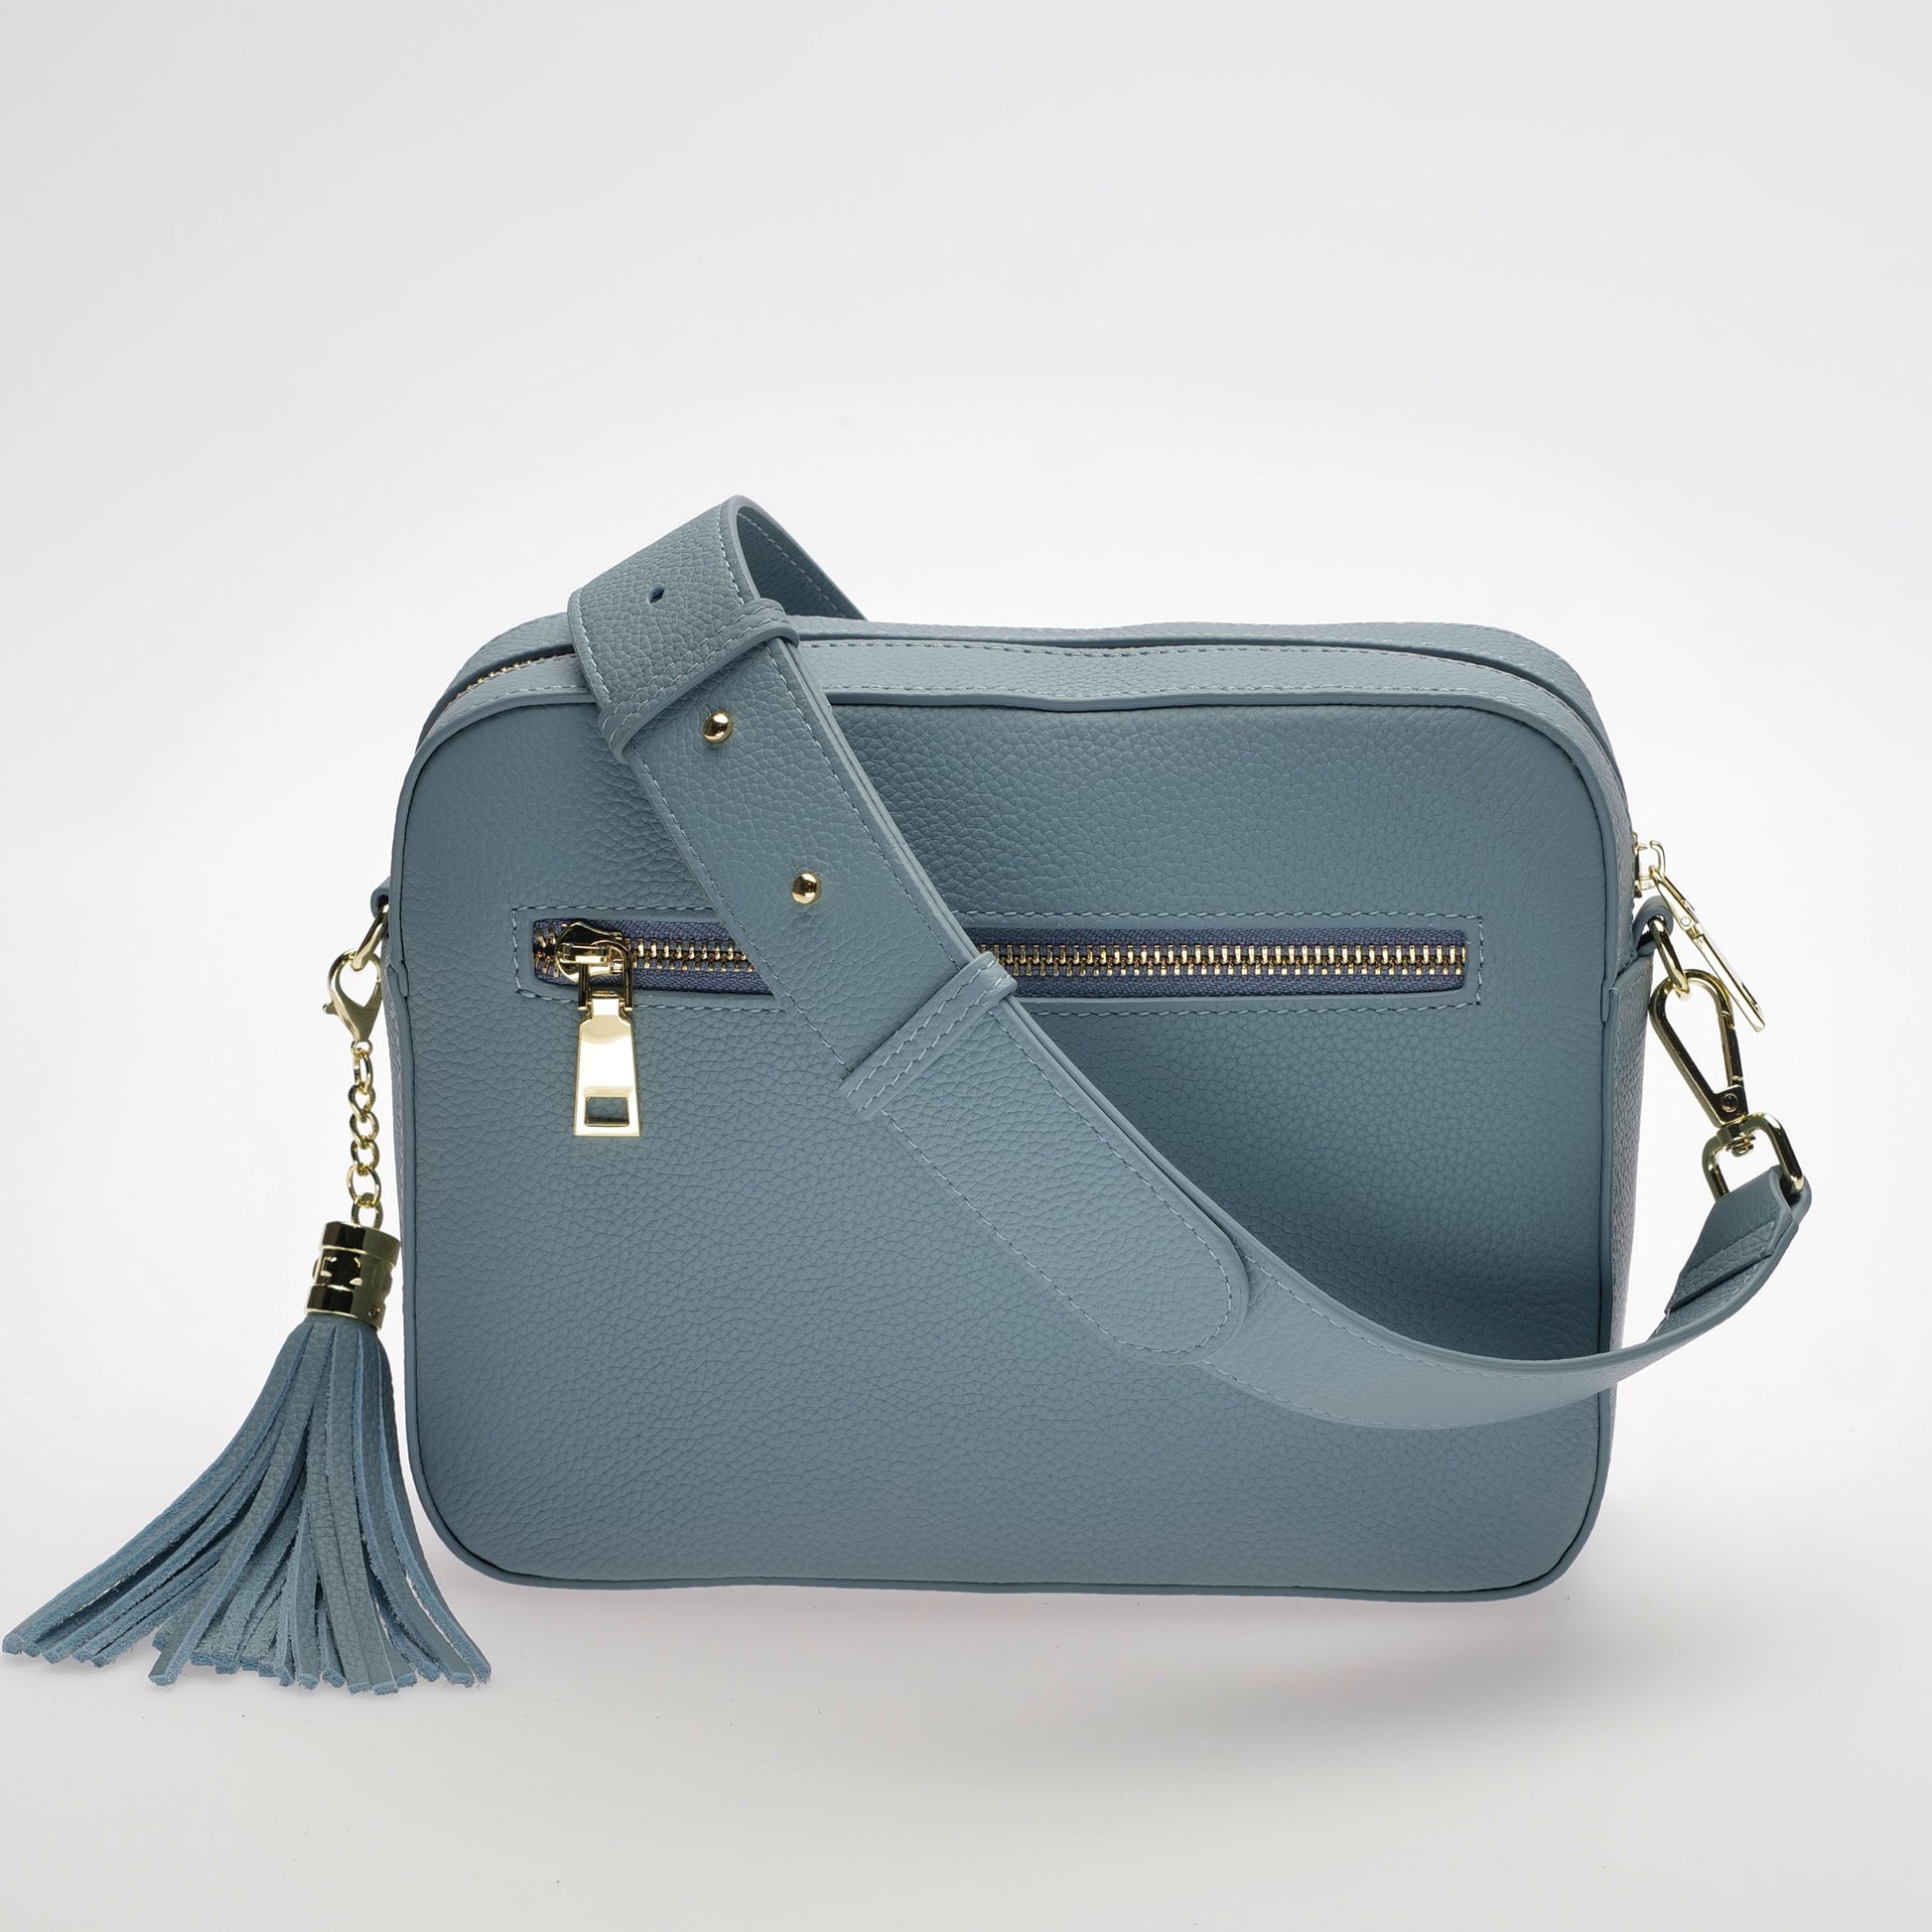 The Stratford Leather Crossbody Bag by Swoon London